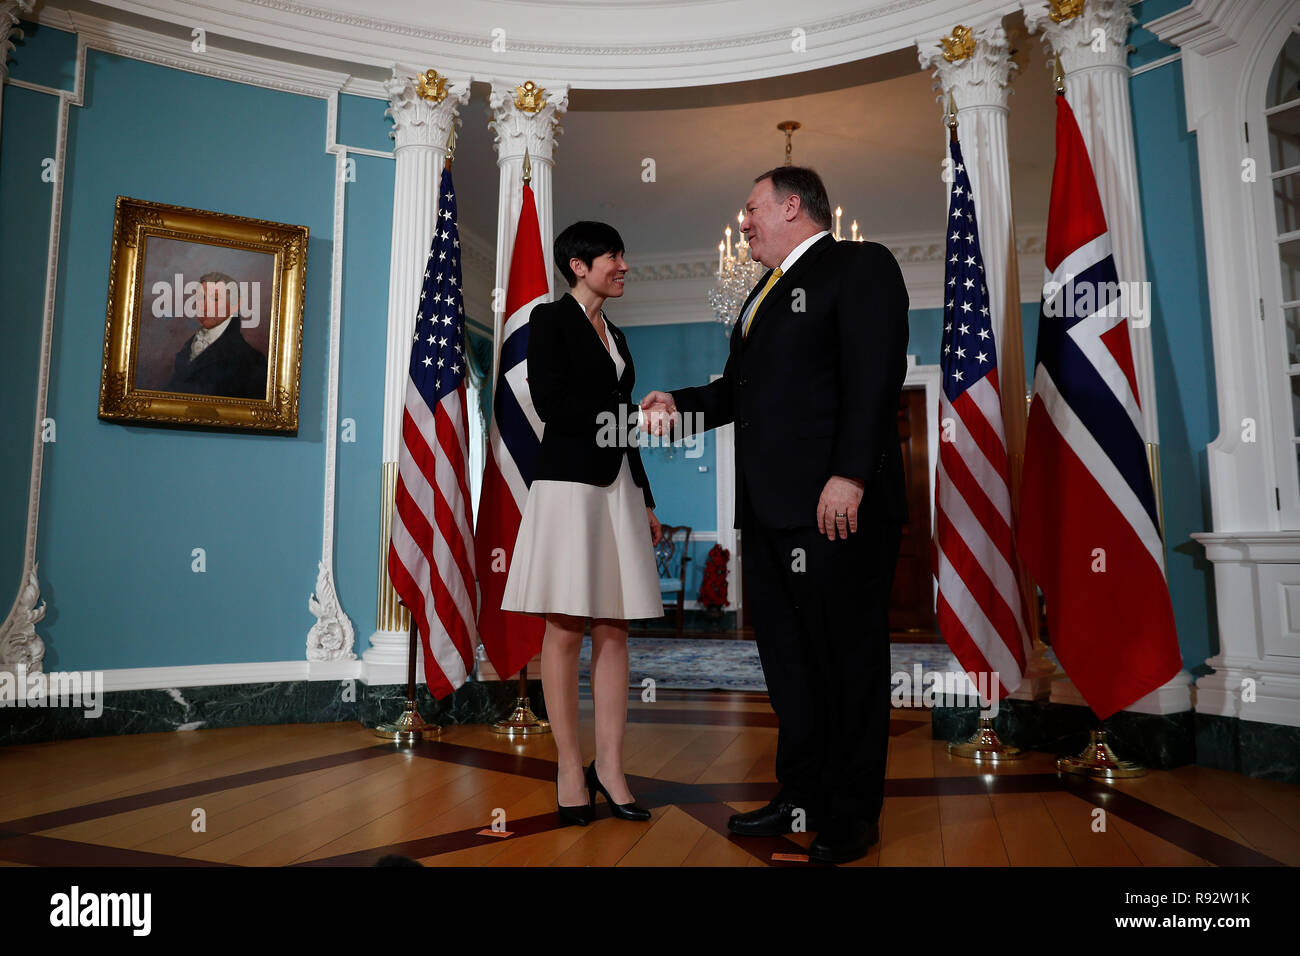 Washington, USA. 19th Dec, 2018. U.S. Secretary of State Mike Pompeo (R) meets with Norwegian Foreign Minister Ine Eriksen Soreide at the U.S. Department of State in Washington, DC, the United States, on Dec. 19, 2018. Credit: Ting Shen/Xinhua/Alamy Live News Stock Photo